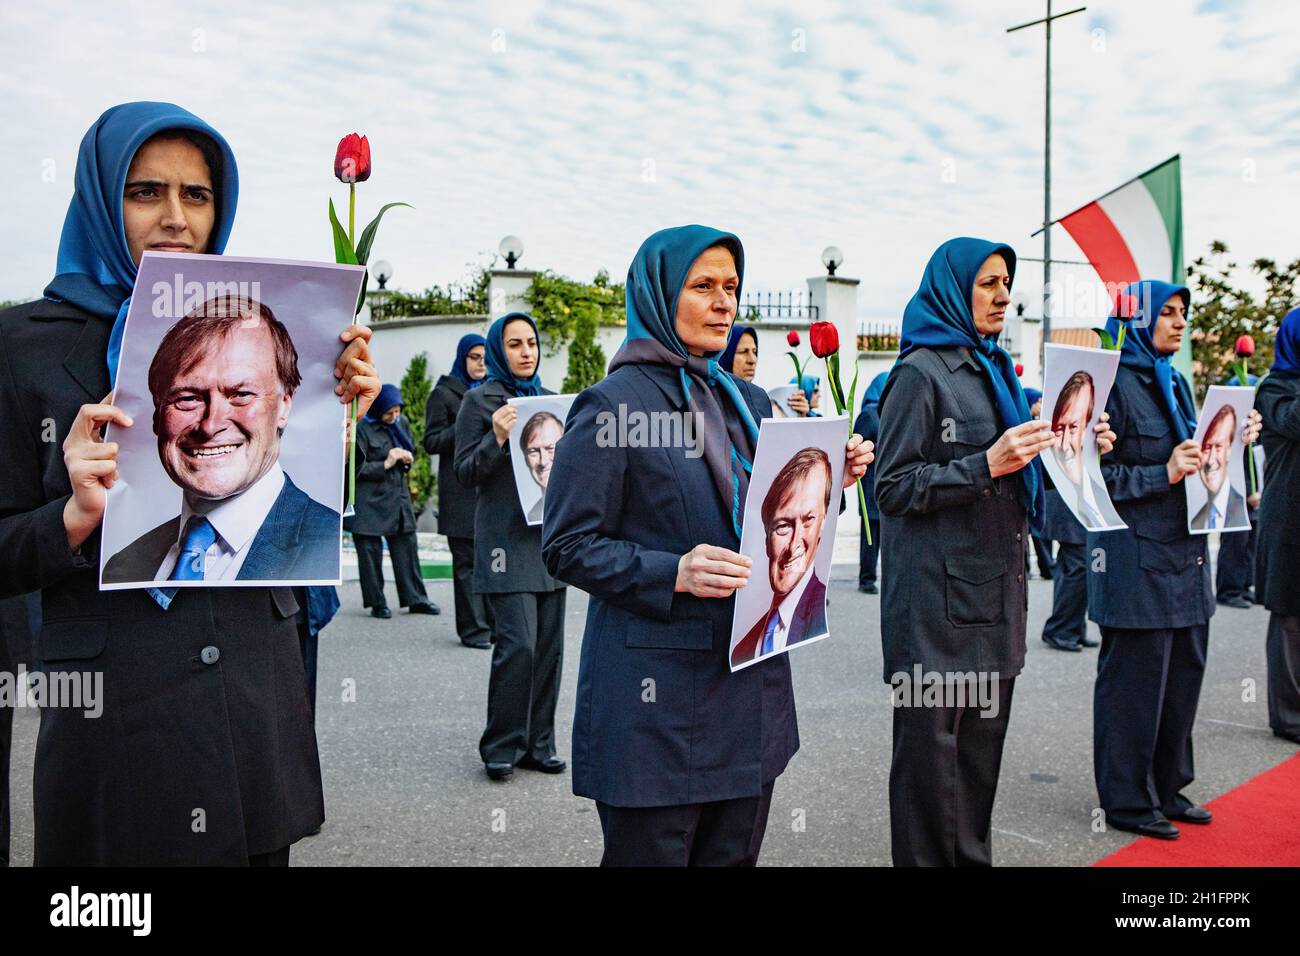 Members of the main Iranian opposition group, the Mojahedin-e Khalq (MEK)  in Ashraf-3, Albania hold pictures of the Sir David Amess, during the  ceremonies in tribute to the late British MP, who